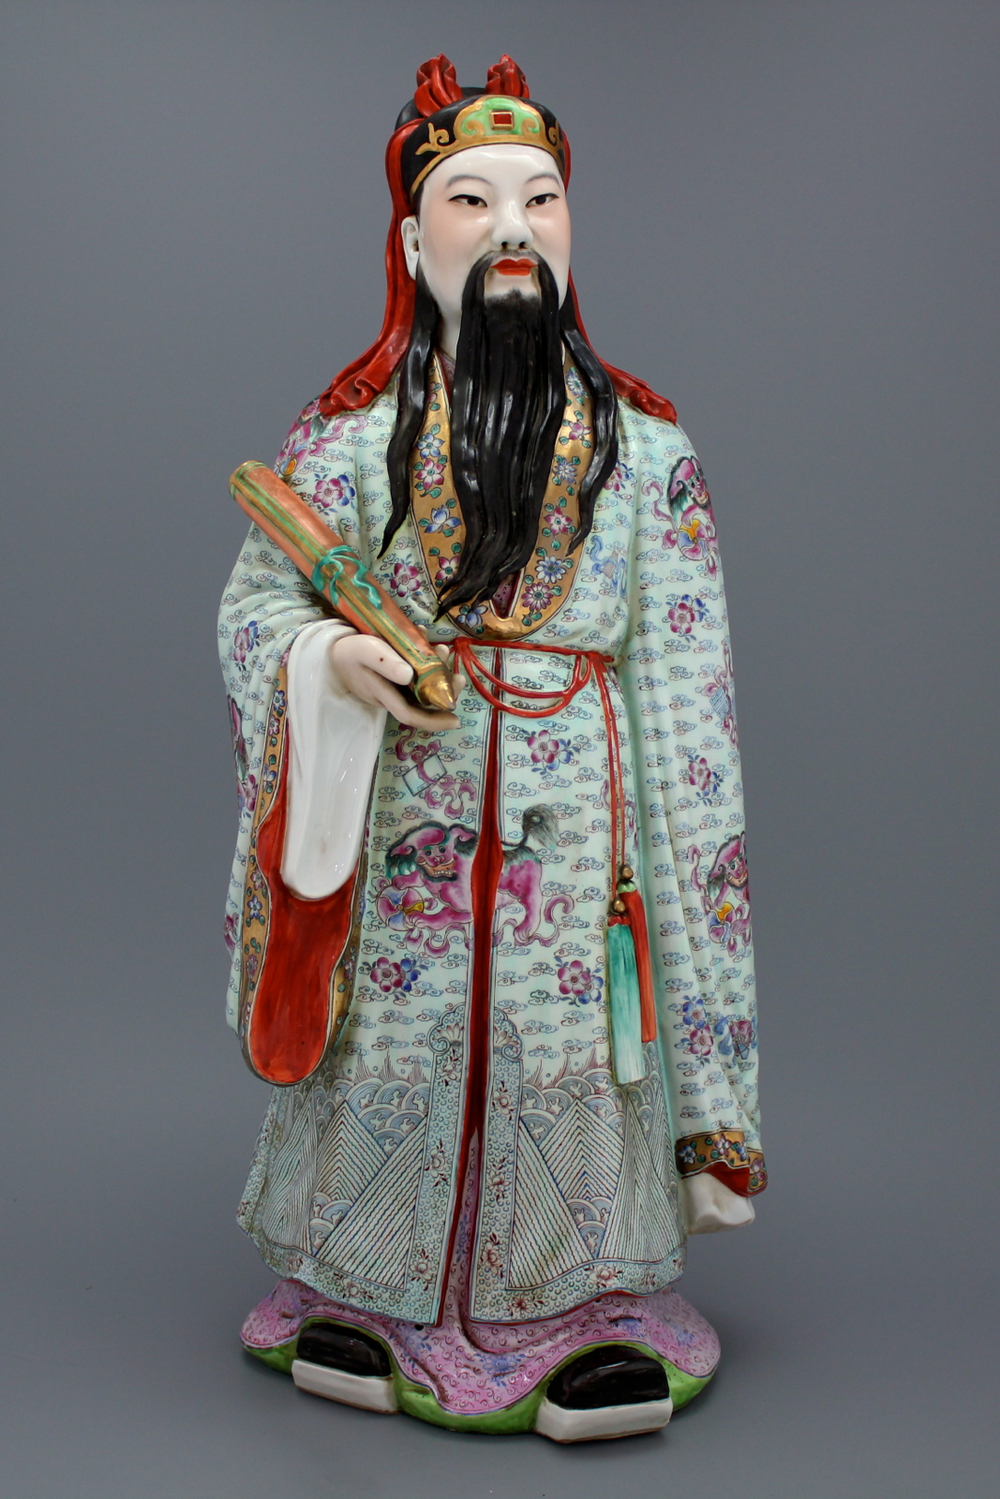 A large Chinese porcelain famille rose immortal figure, Republic